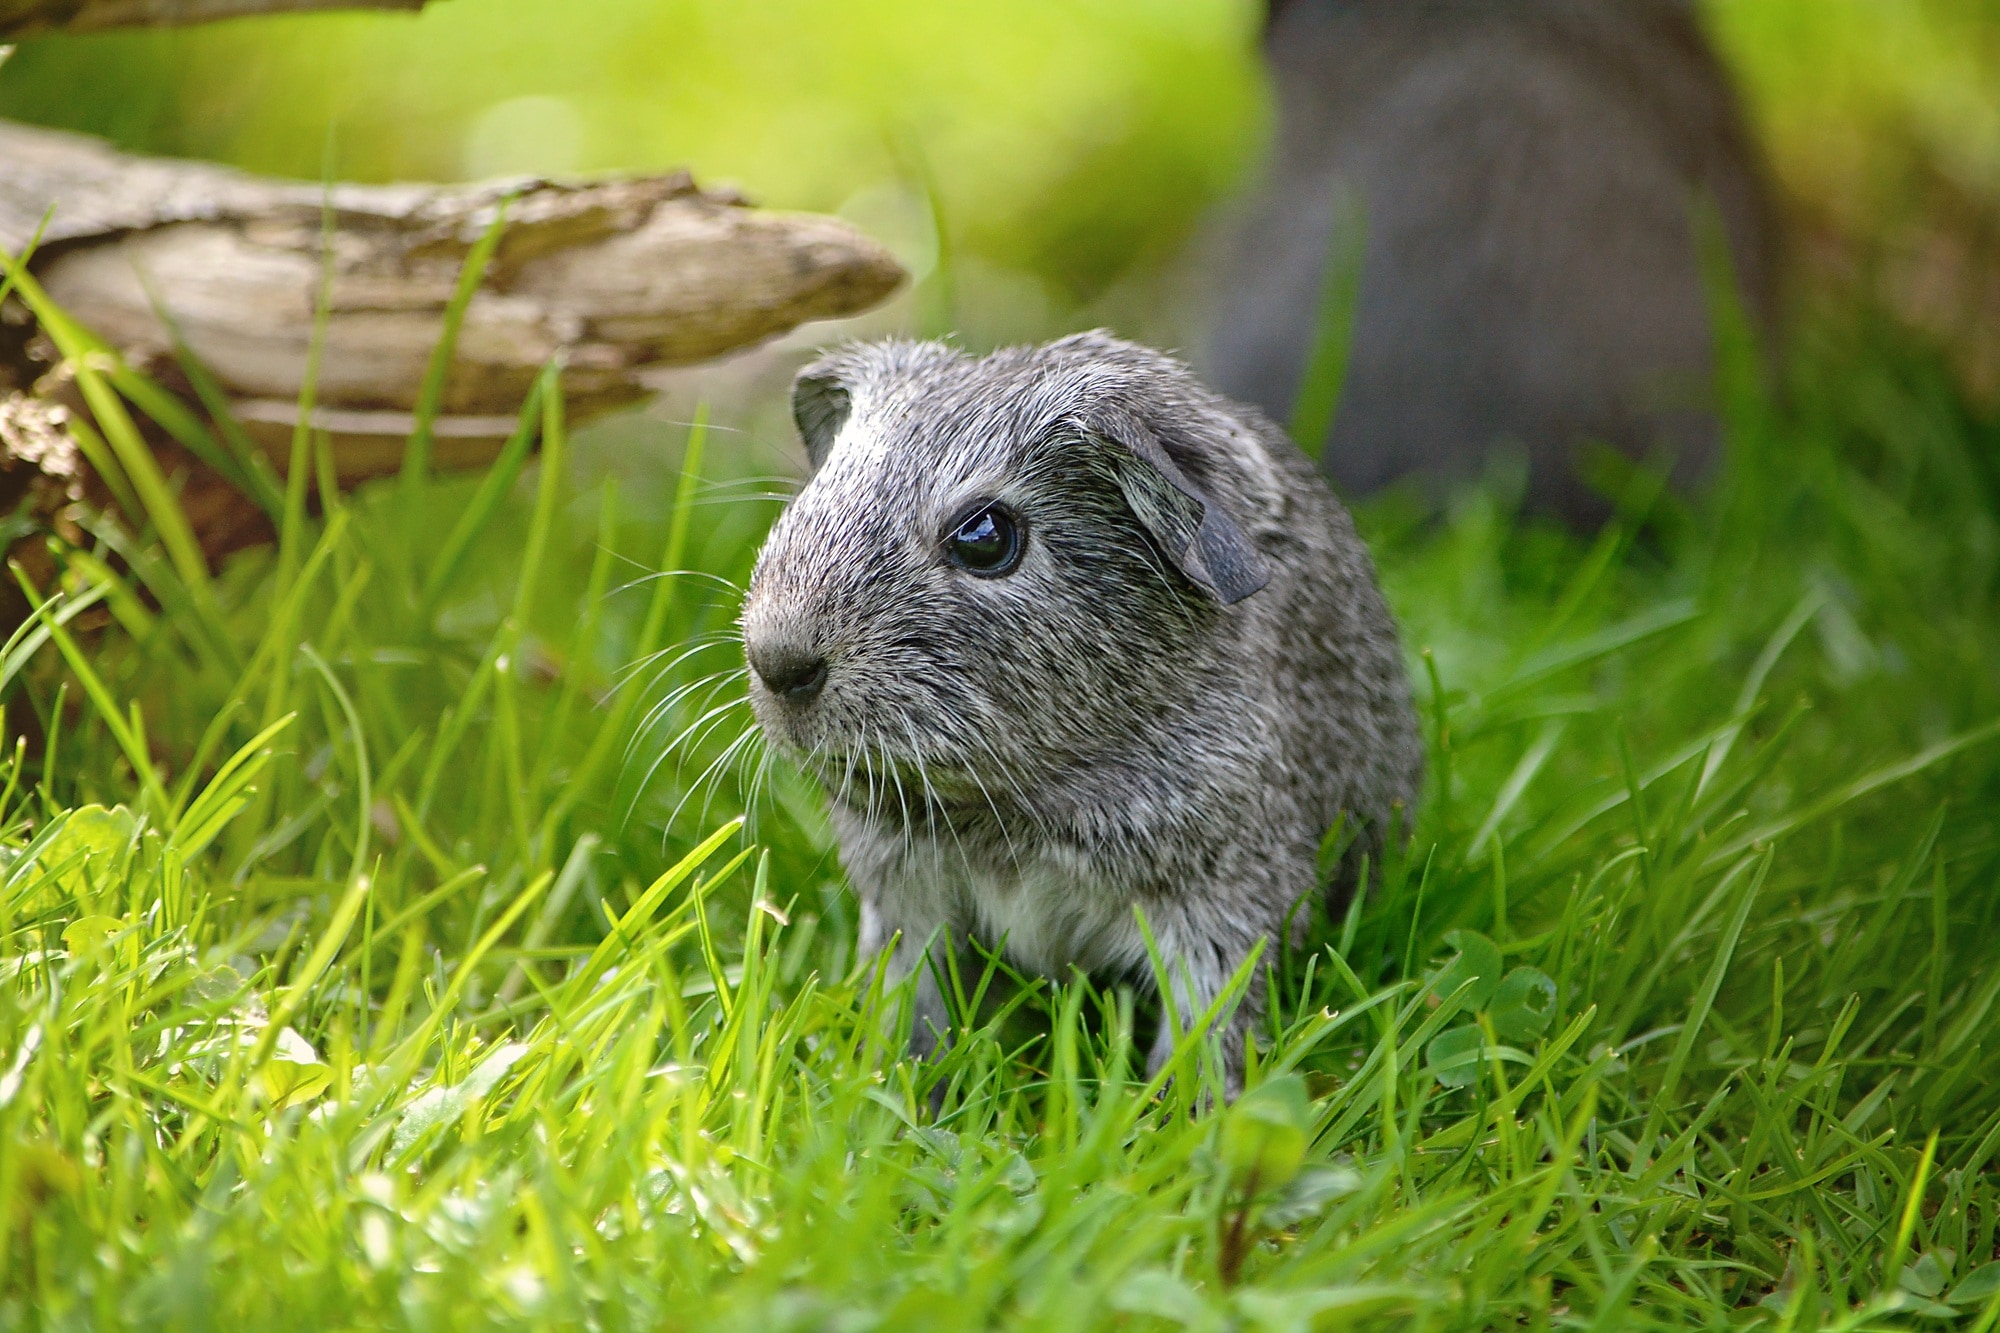 Guinea Pig, Smooth Hair, Young Animal, one animal, grass